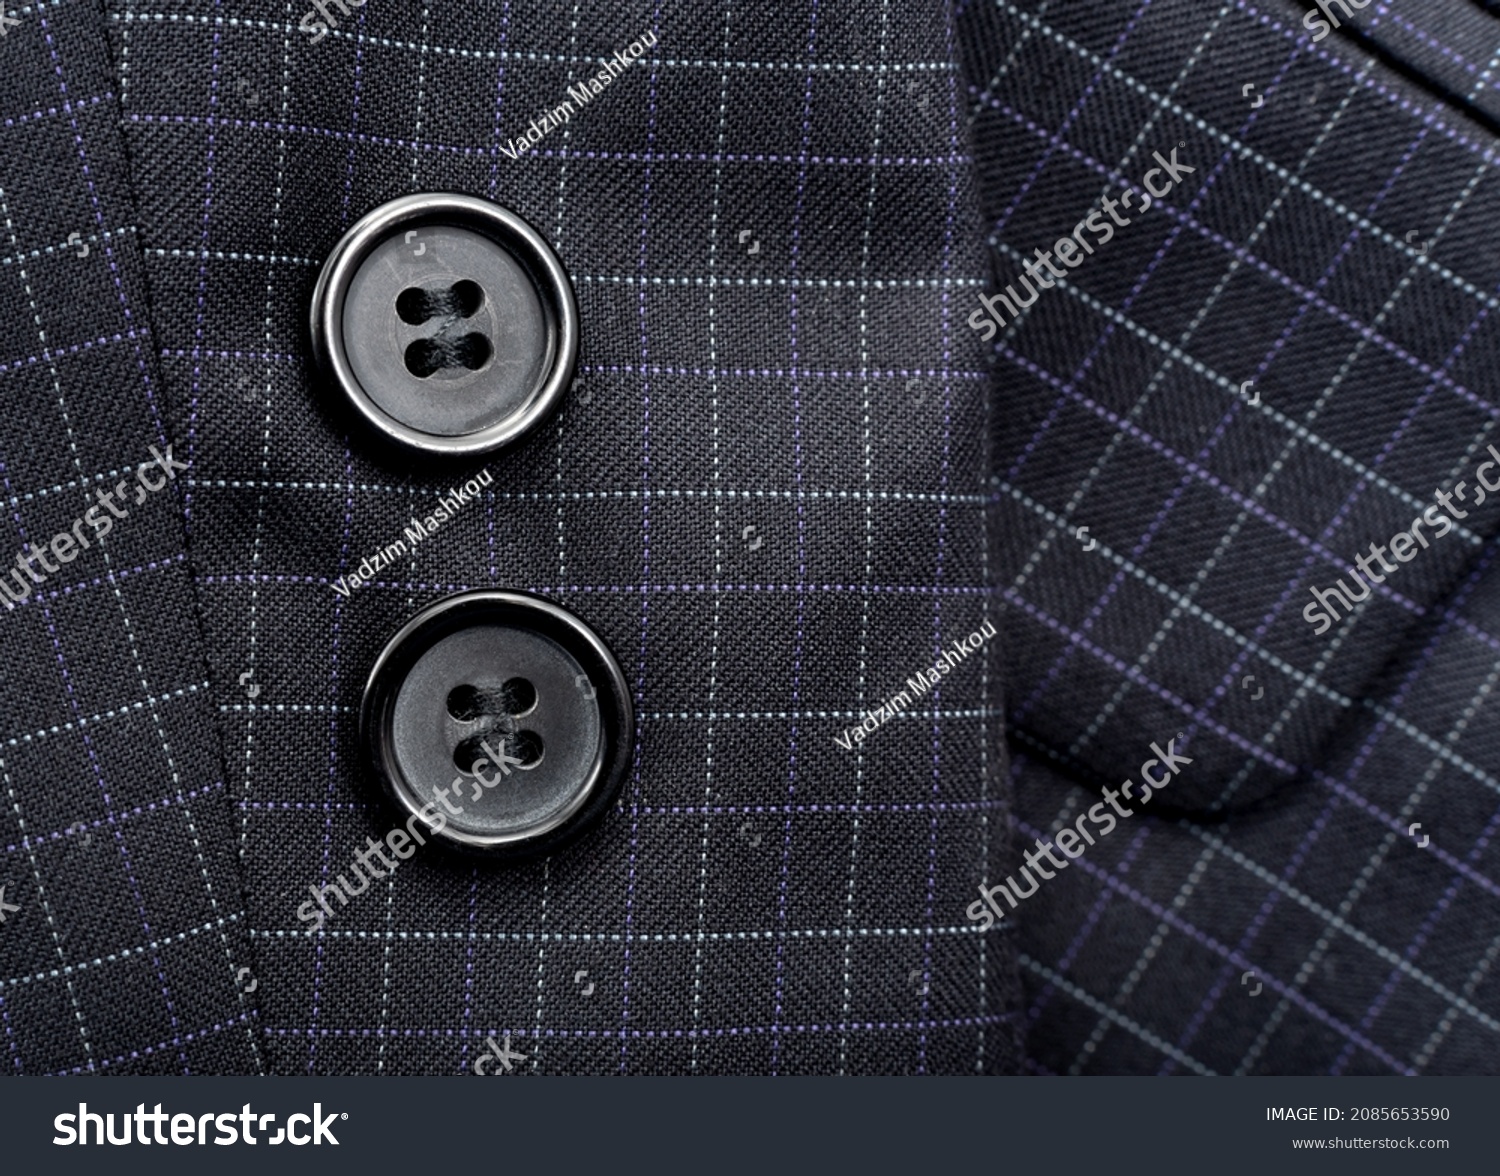 Sleeve with buttons on the men's check suit. Men's suit. Part, item of clothing #2085653590